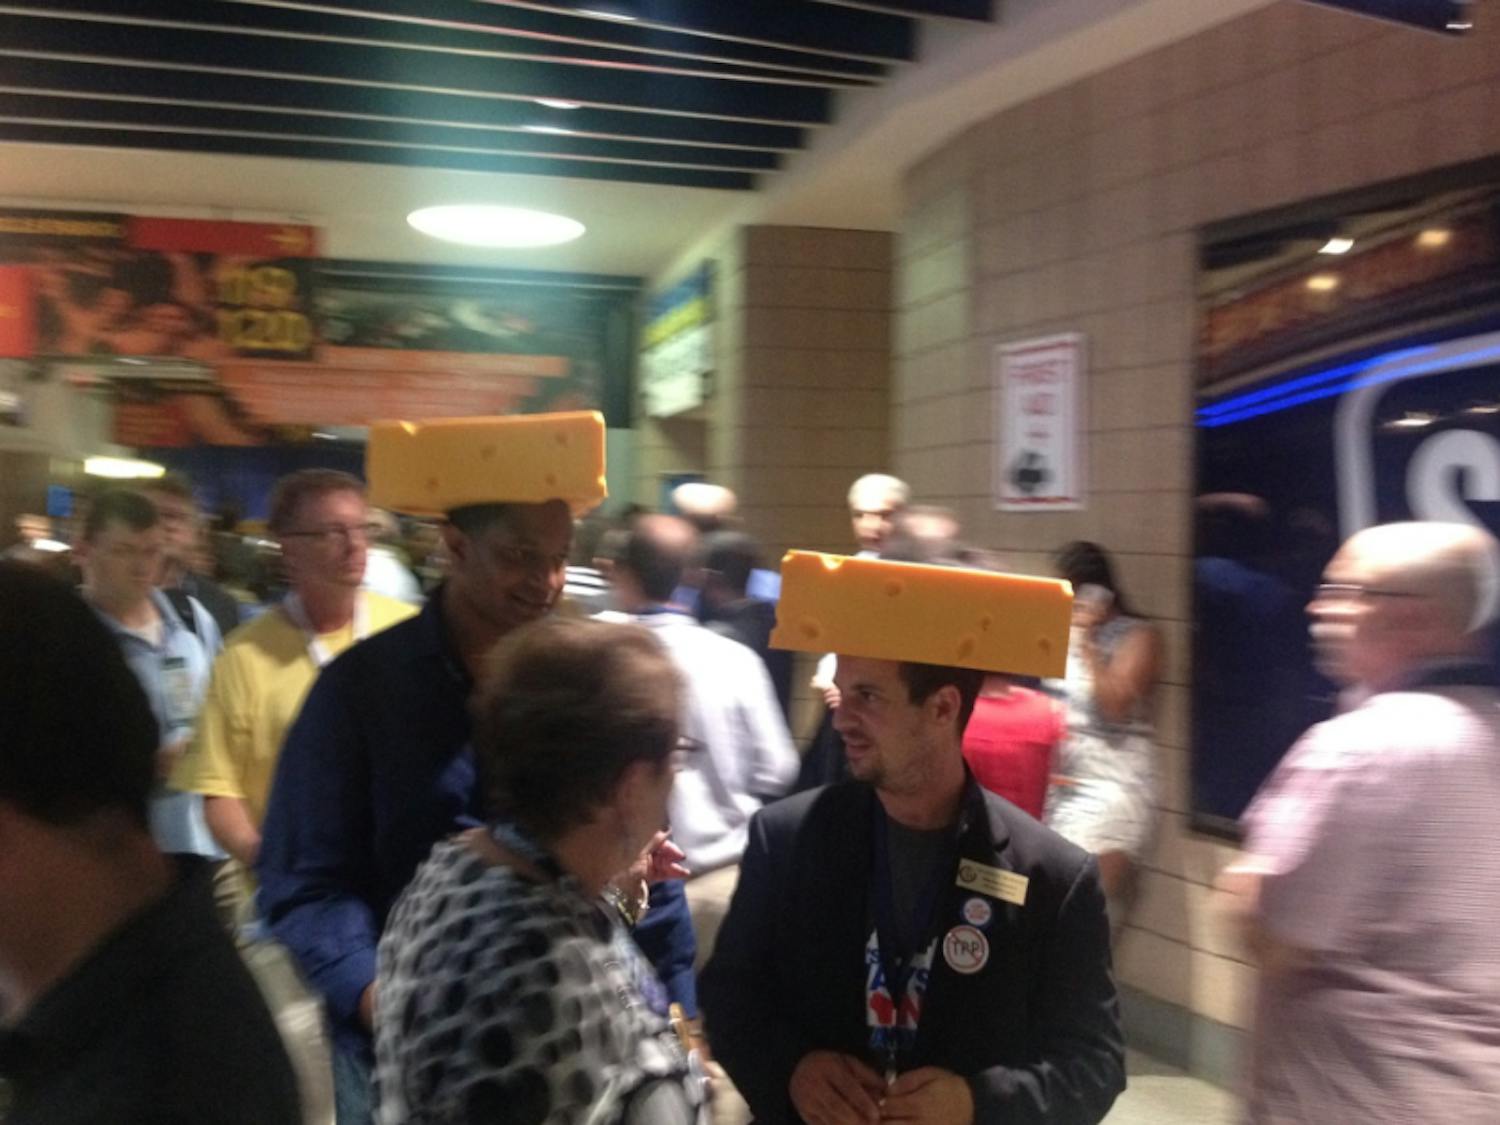 Two delegates from Wisconsin make their way through the crowd at the Democratic National Convention in Philadelphia on July 28, 2016.